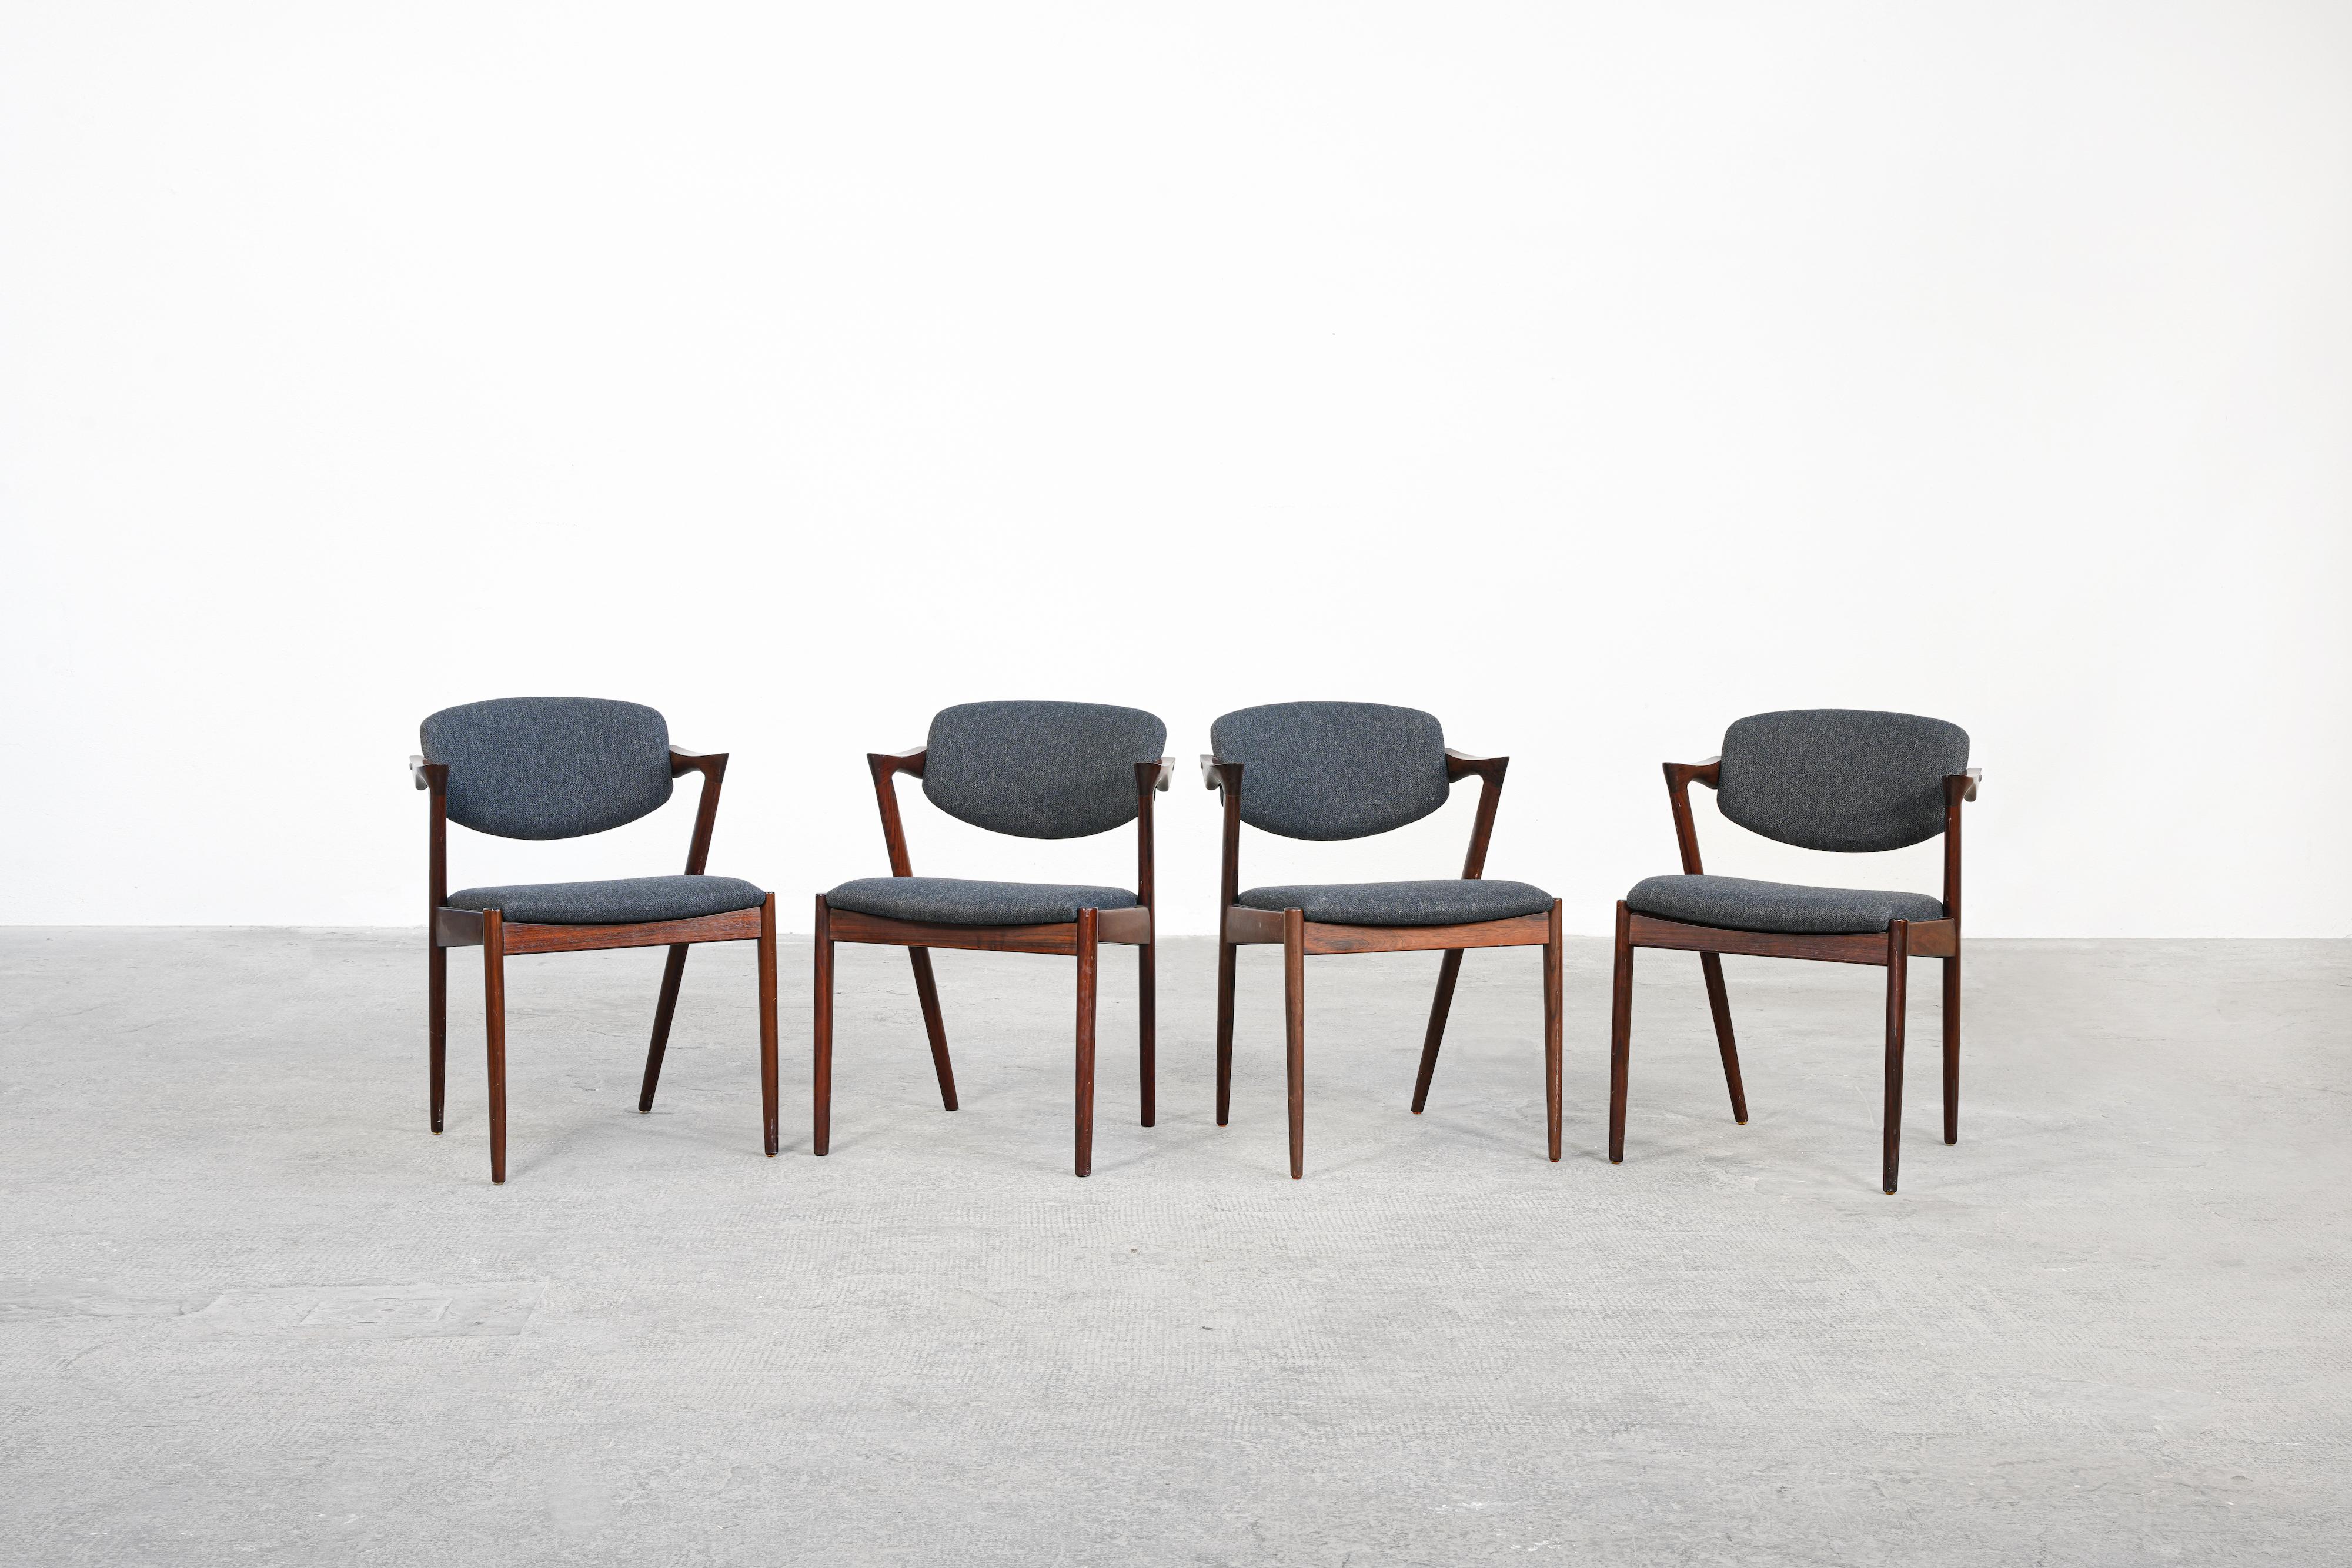 Very beautiful set of four dining chairs designed by Kai Kristiansen and produced by V. Schou Andersen, Denmark in 1964. The chairs are in very good condition, all of them were newly reupholstered with high-quality fabric in dark grey by